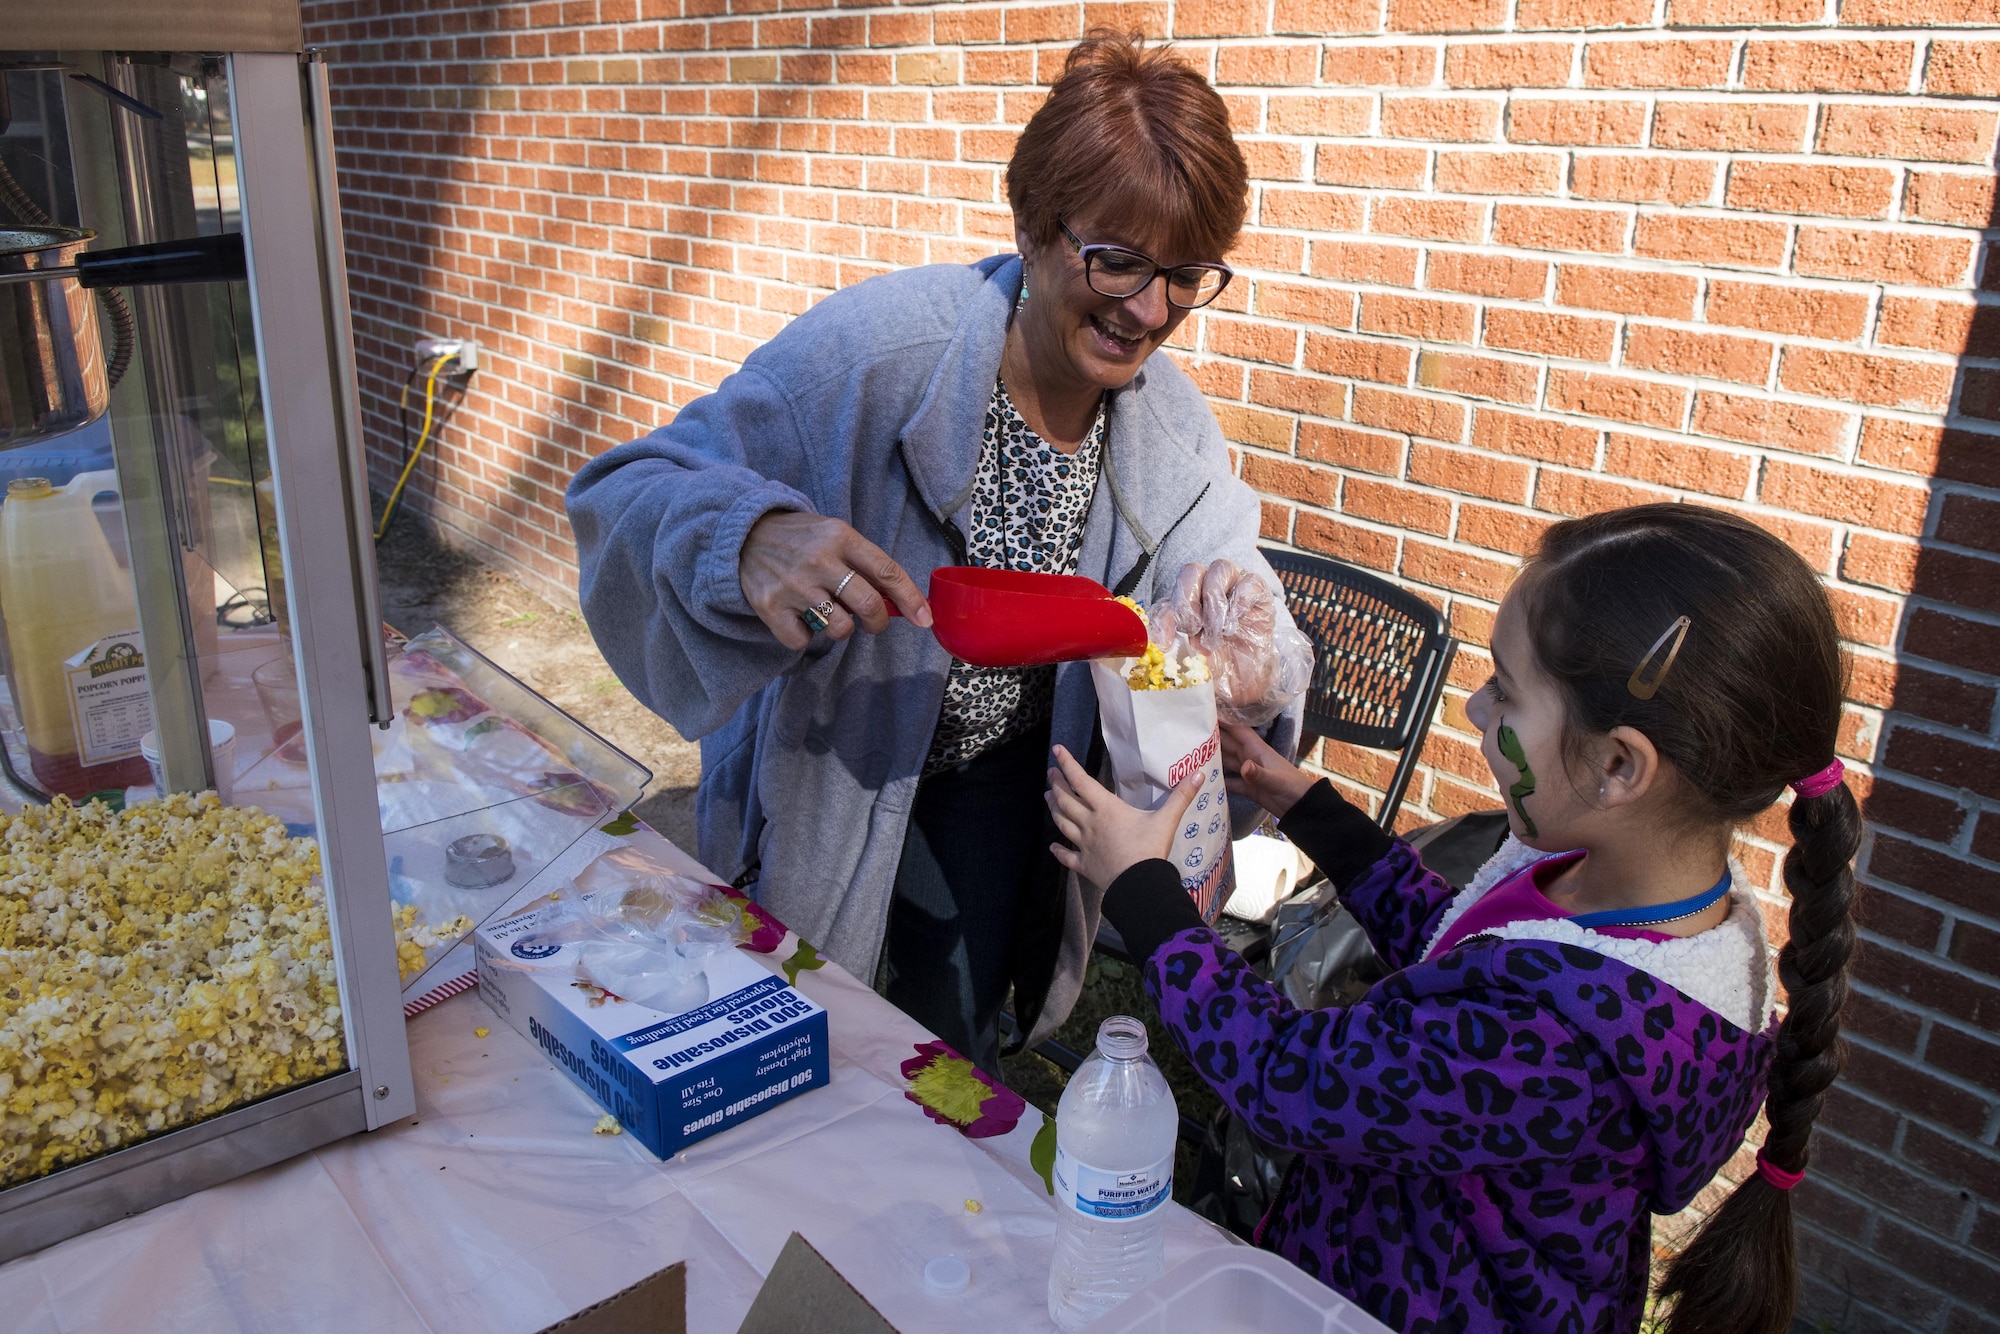 Elizabeth Smothers (left), 4th Force Support Squadron Airman and Family Readiness community readiness consultant, gives popcorn to a child during an annual Military Family Appreciation event, Nov. 5, 2016, at Seymour Johnson Air Force Base, North Carolina. More than 300 Airmen and family members received a free lunch and the opportunity to participate in multiple activities aimed at showing appreciation and providing a fun atmosphere. (U.S. Air Force photo by Airman Shawna L. Keyes)